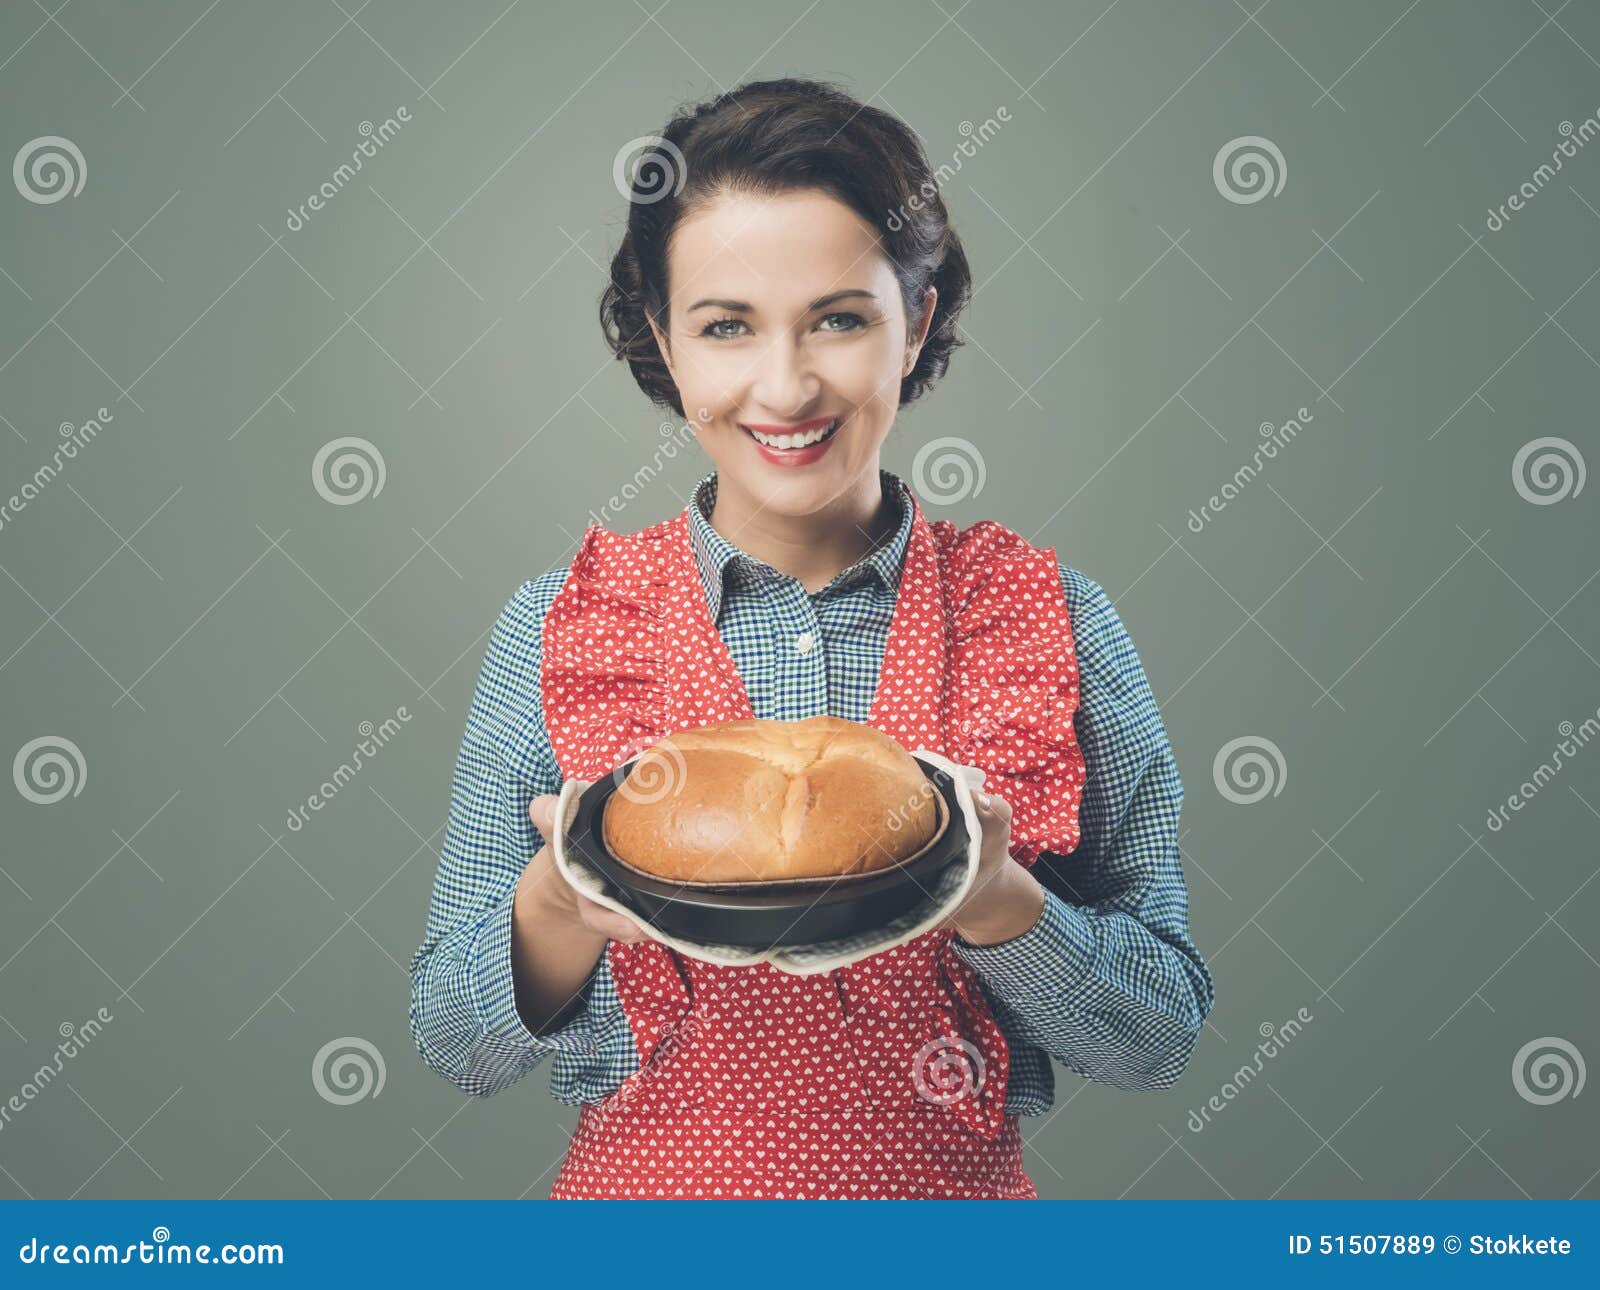 Vintage Housewife Holding an Homemade Cake Stock Image